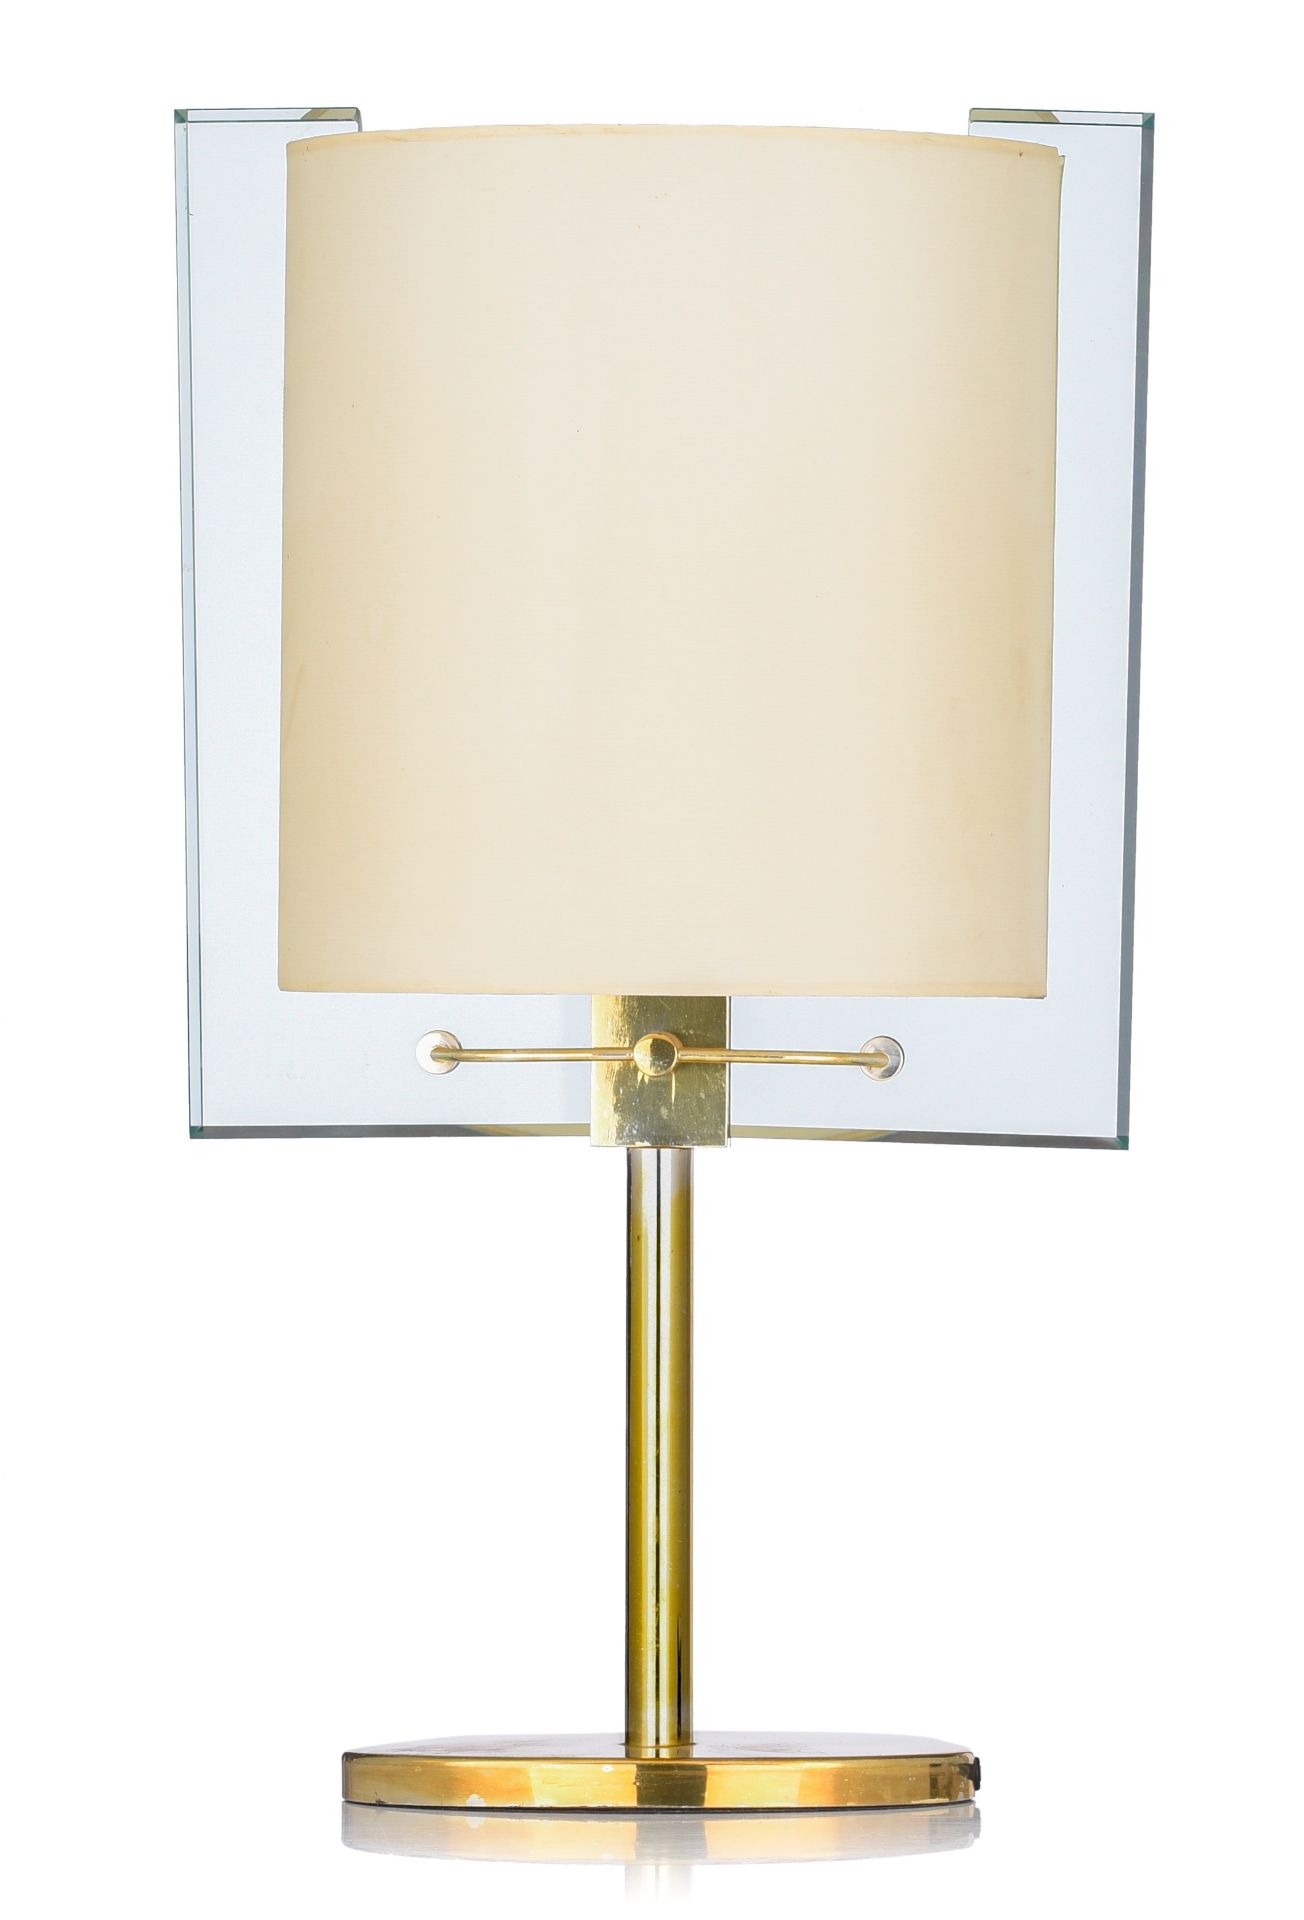 A brass and glass model 2833 design table lamp by Nathalie Grenon for Fontana Arte, Italy, H 61 cm